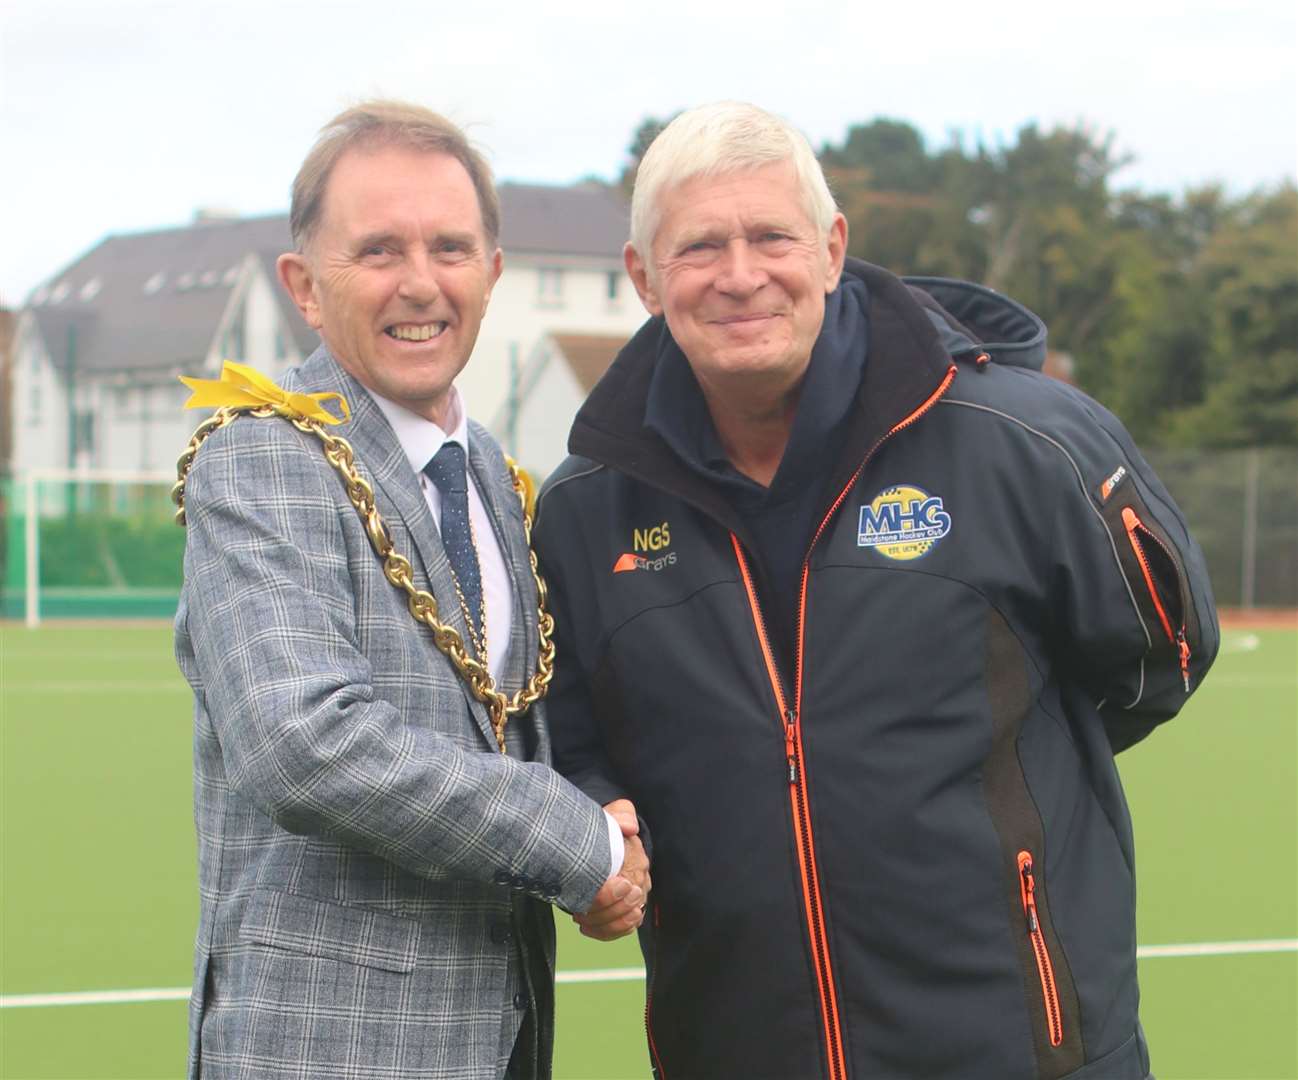 Mayor of Maidstone Cllr Derek Mortimer with Maidstone Hockey Club chairman Nigel Swaffer at the opening of the new pitch at Armstrong Road.